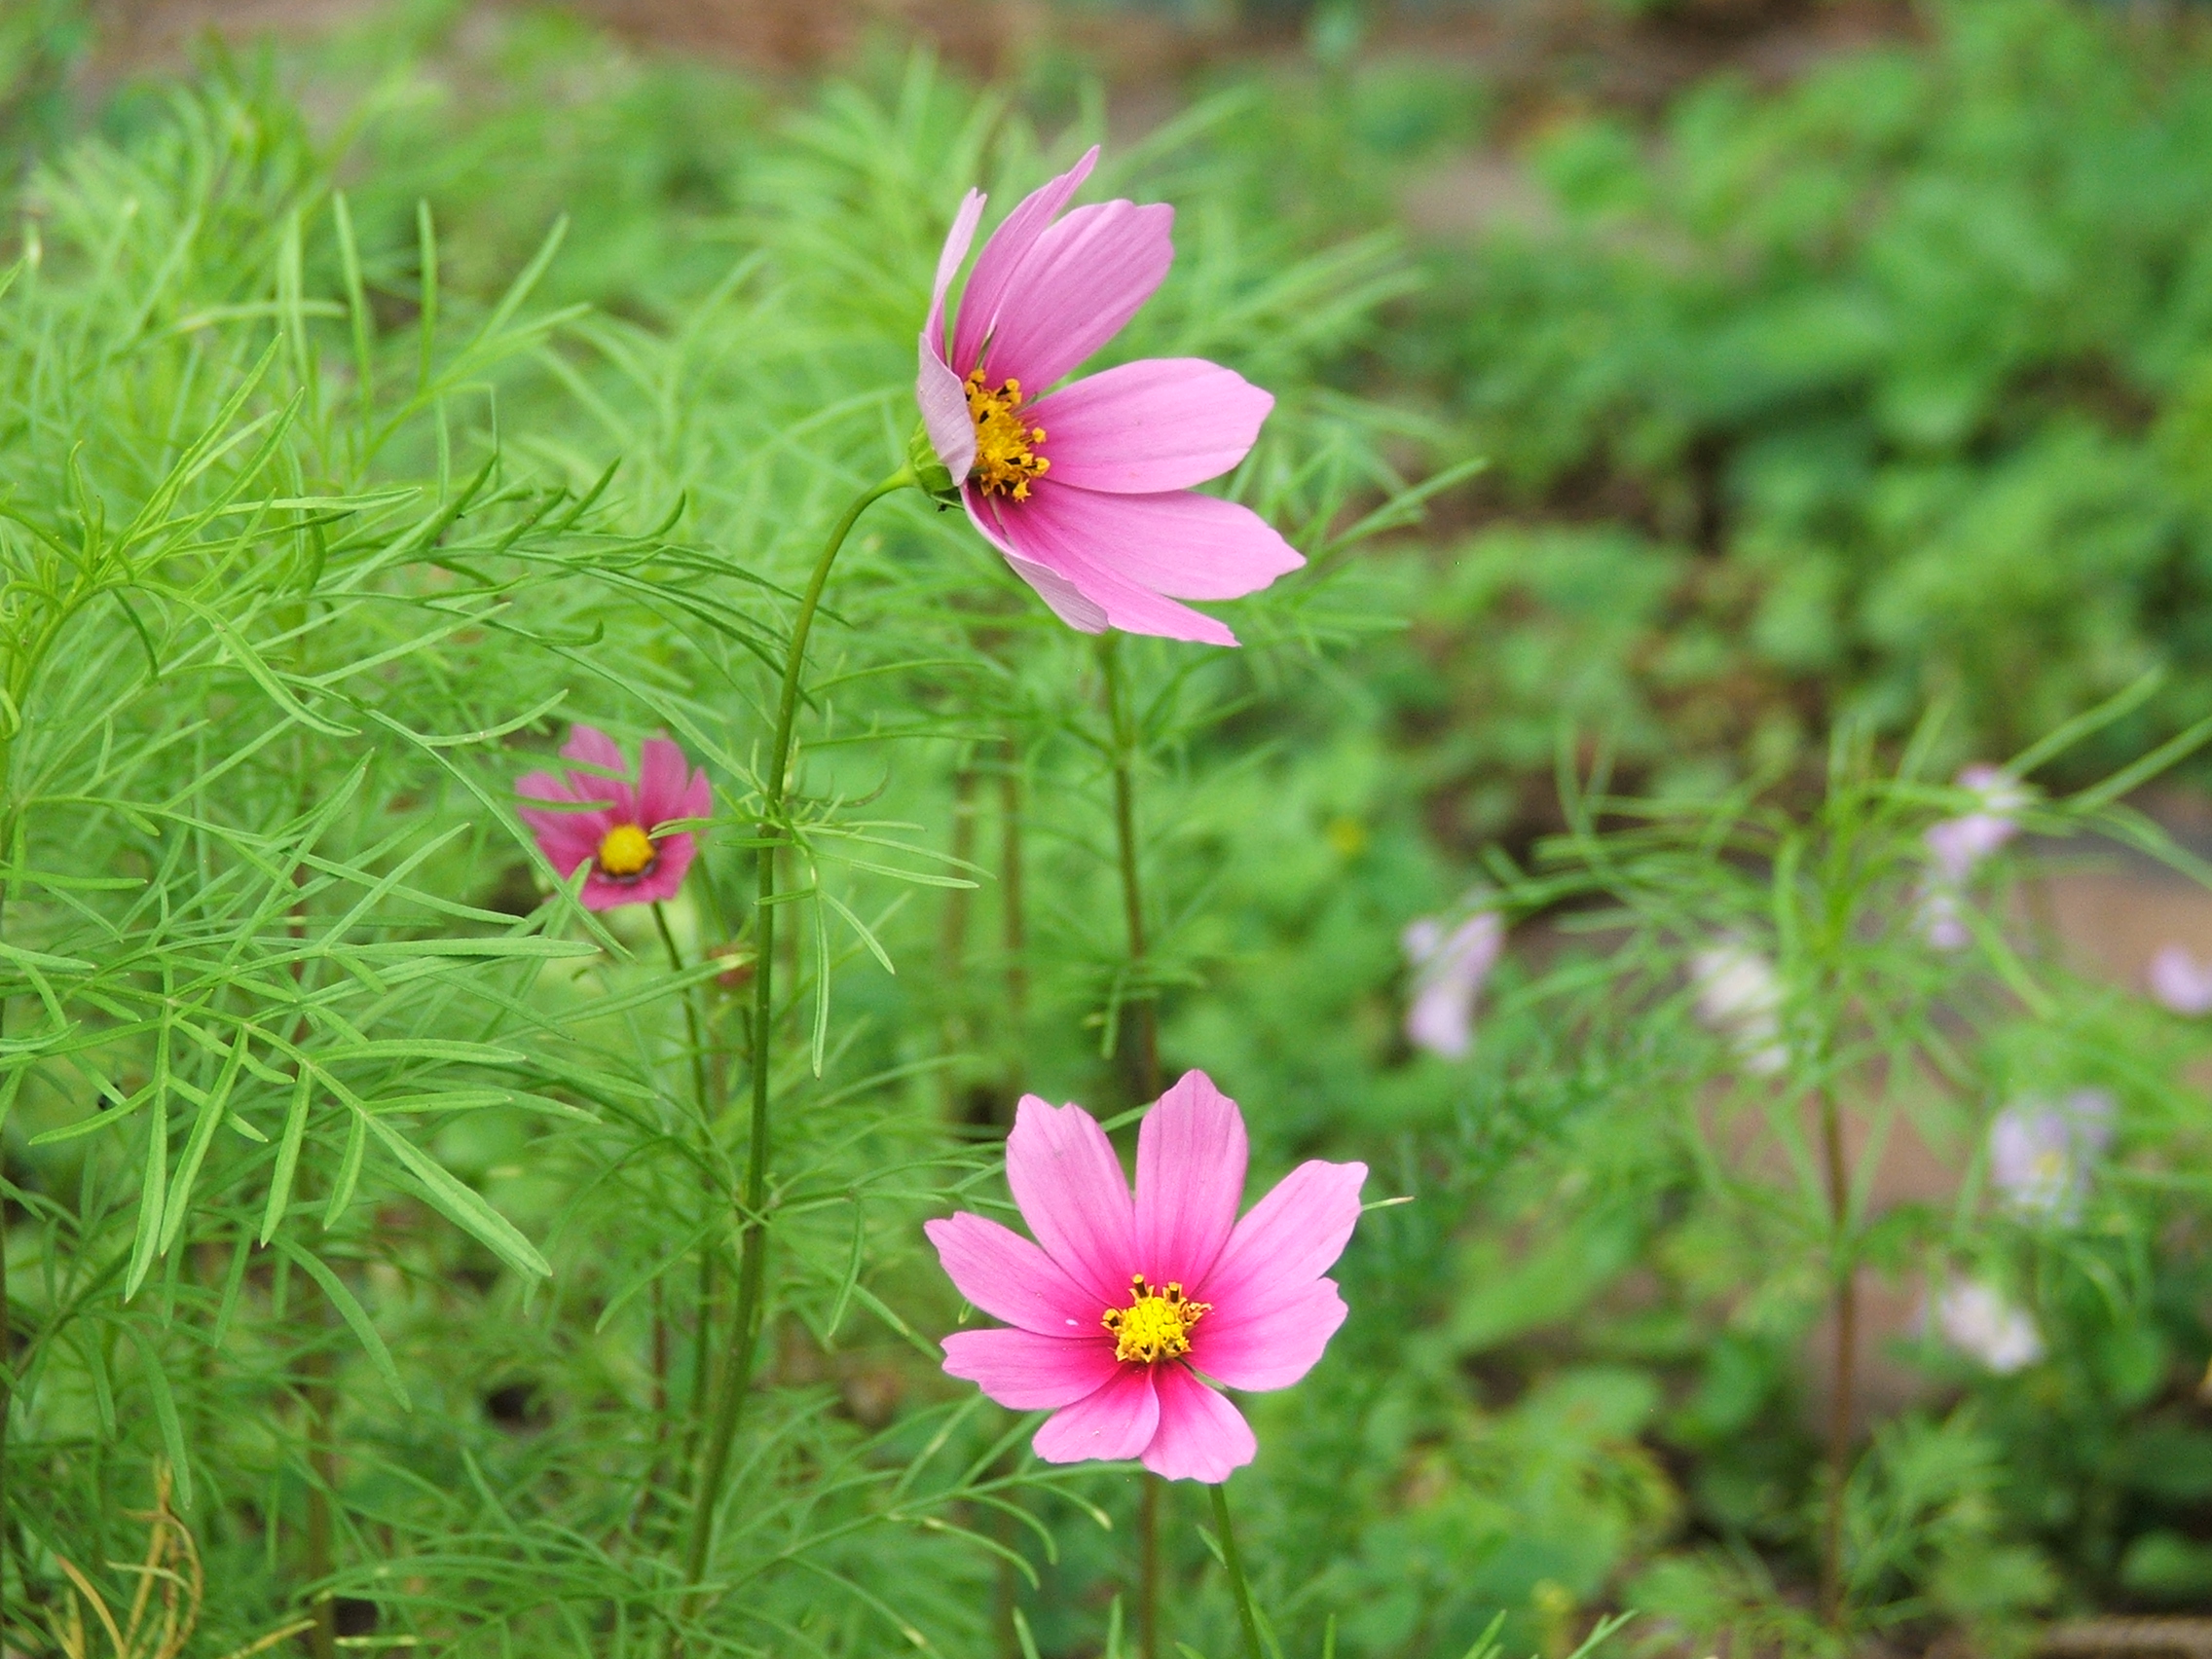 cosmos flowers | Pics4Learning